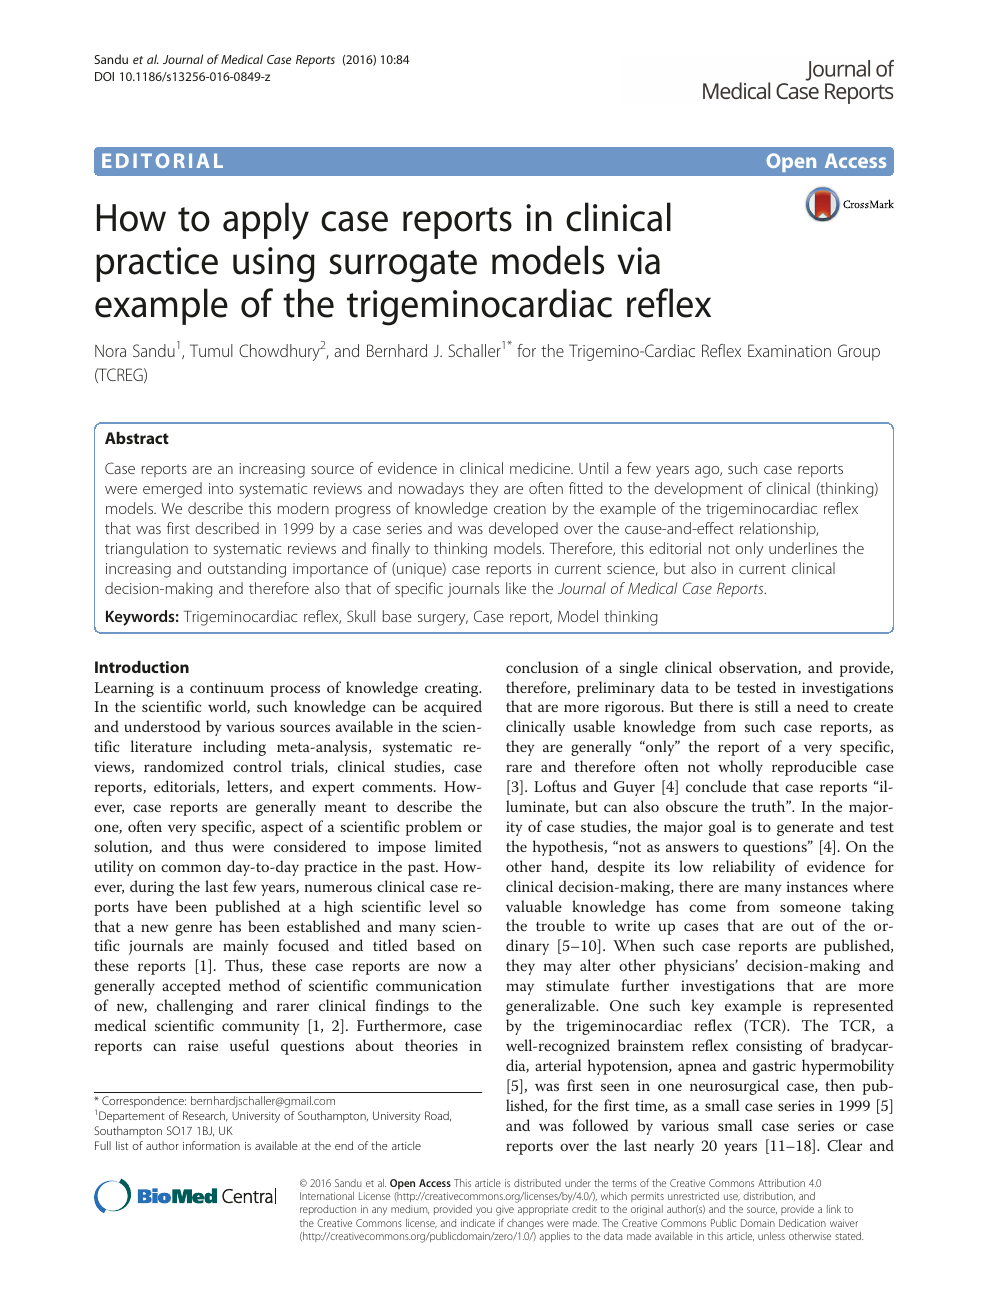 How to apply case reports in clinical practice using surrogate